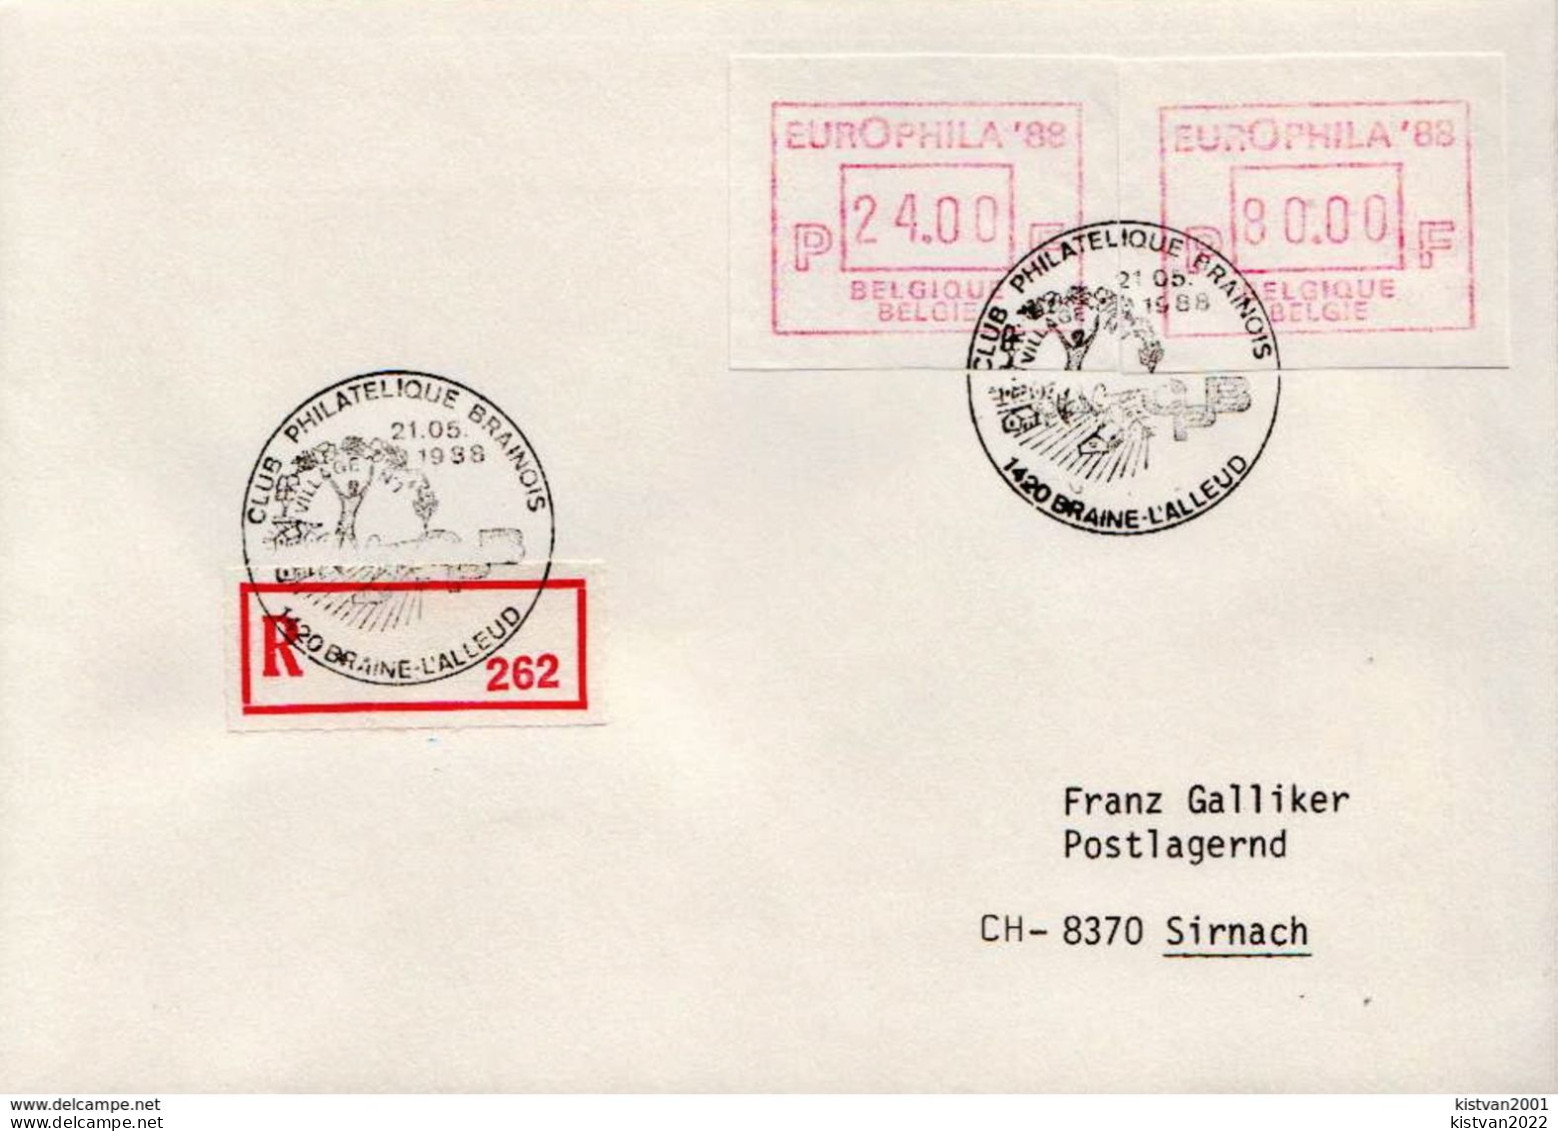 Postal History: Belgium R Cover With Automat Stamps - Lettres & Documents